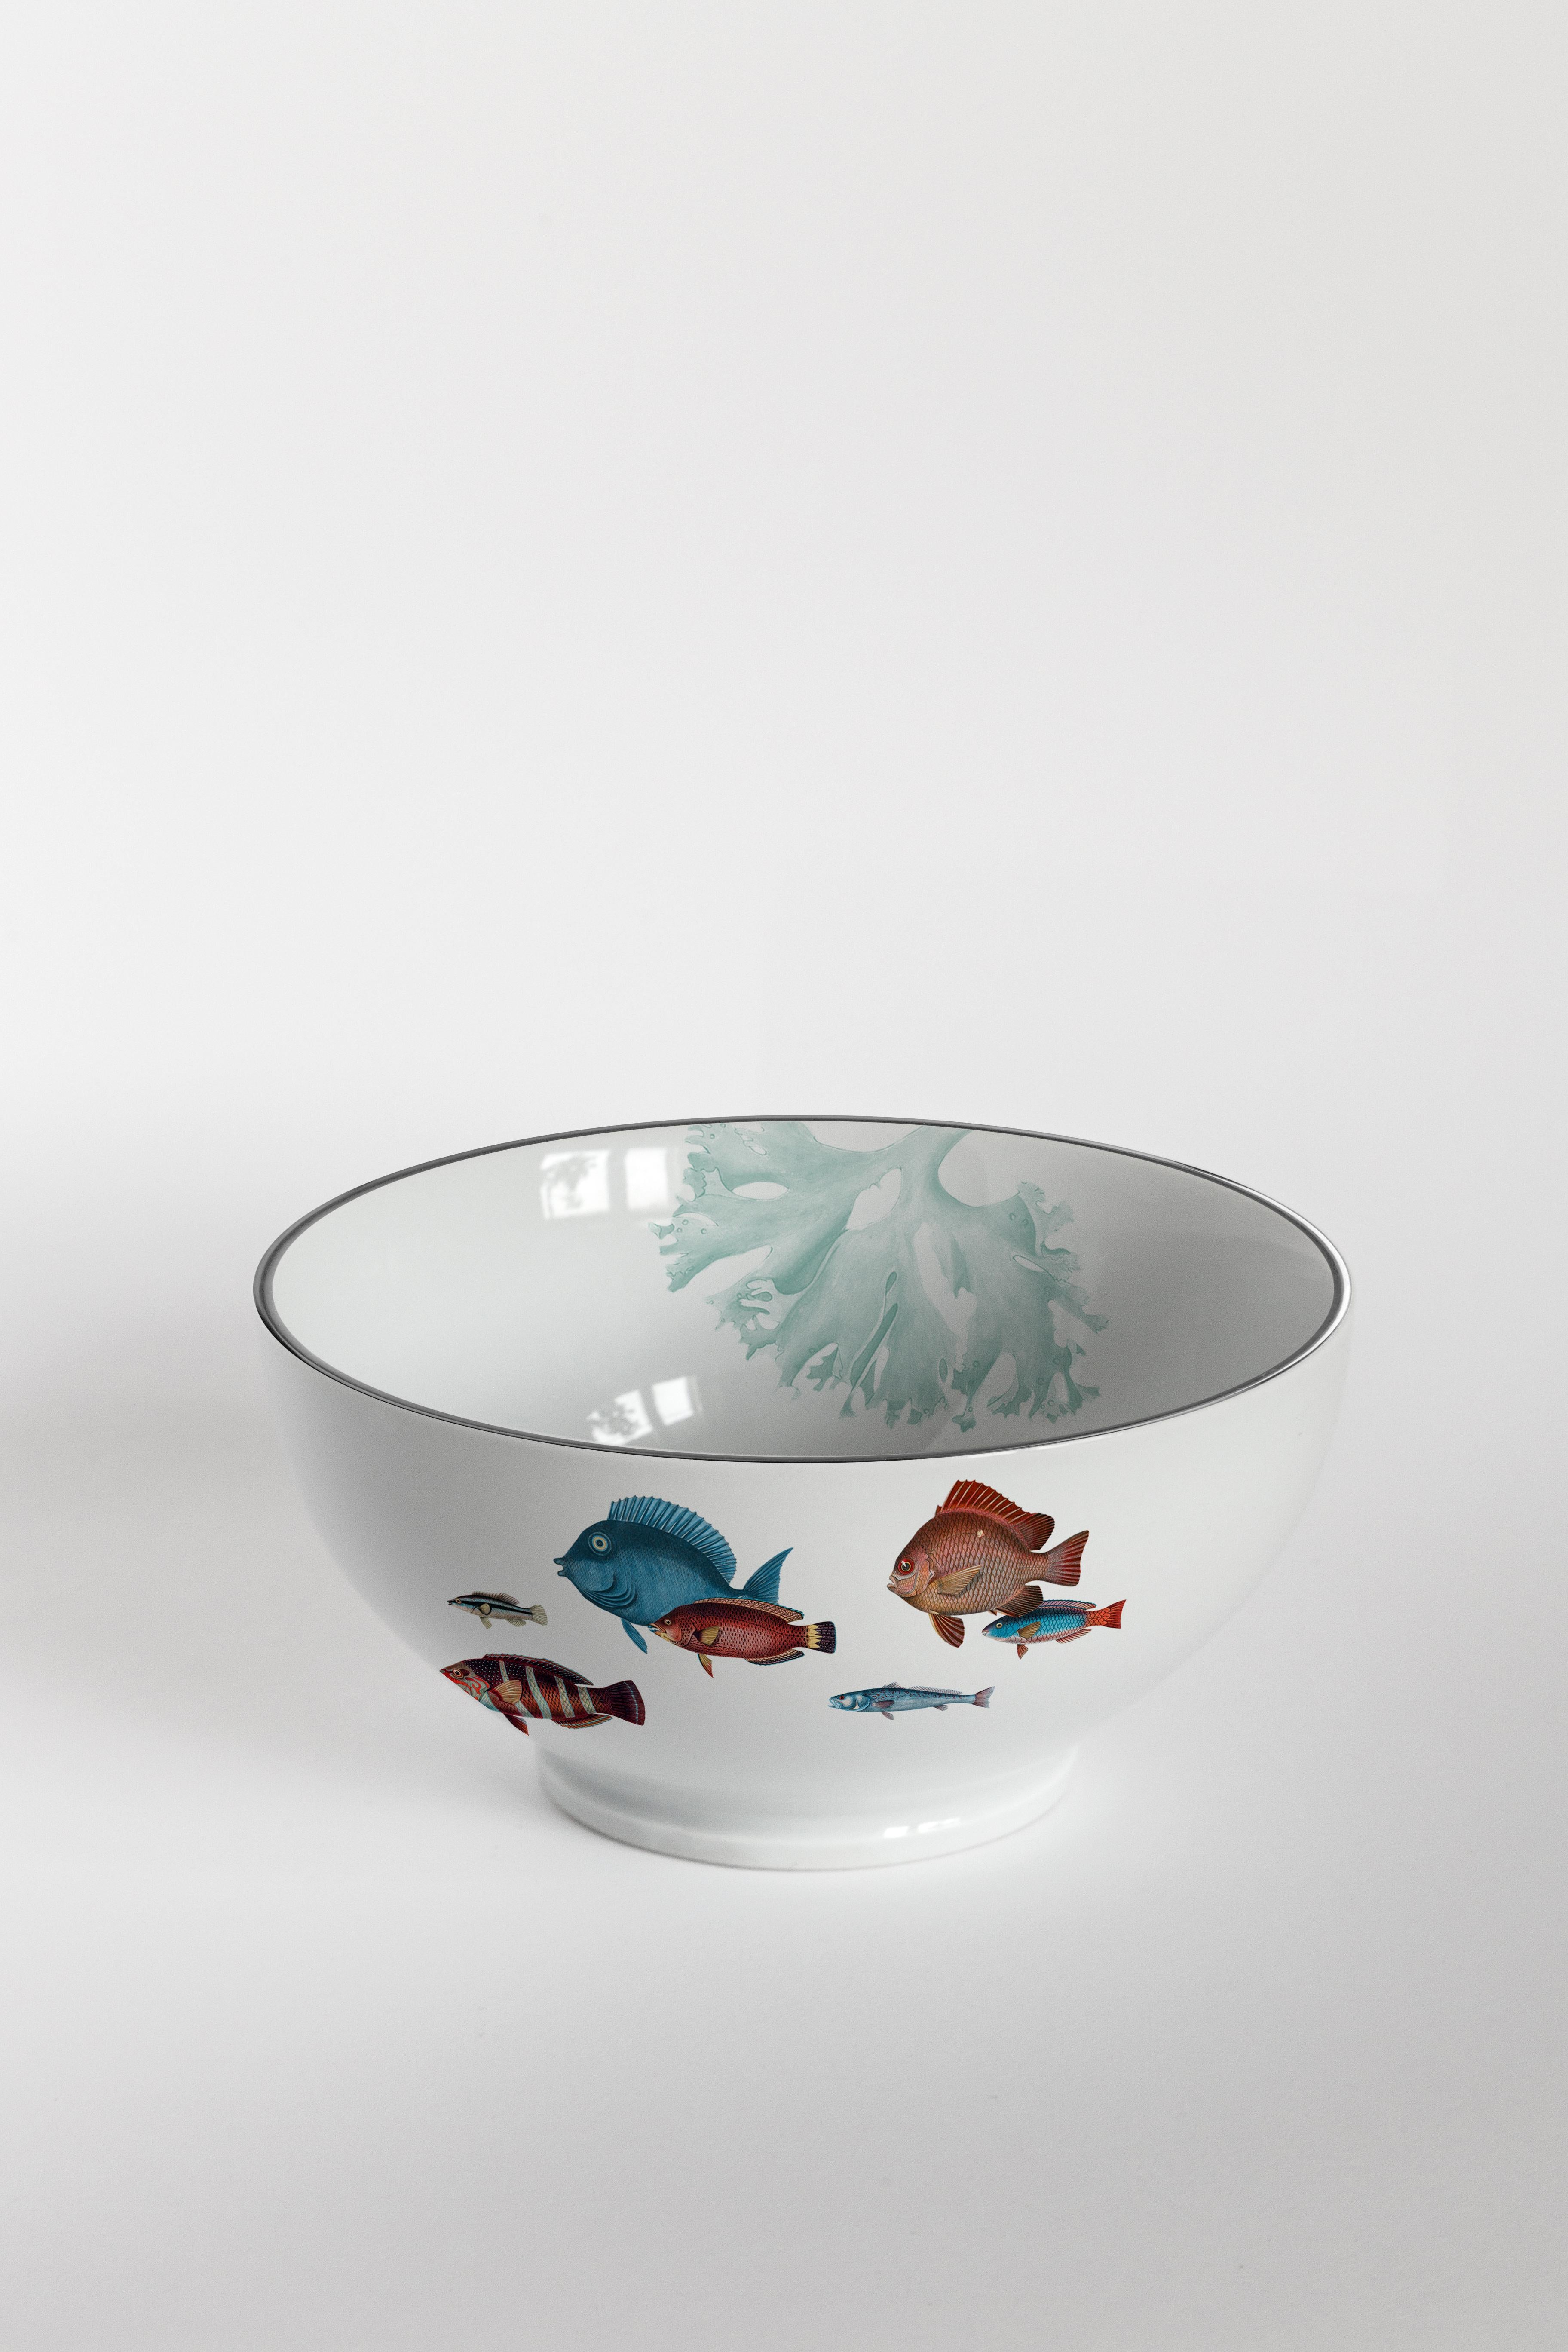 Inspired by the coral reef of the Amami Islands in Japan, the Amami collection features tropical fishes and beautiful seaweed. A perfect choice for every spot near the seaside.
6 bowls.